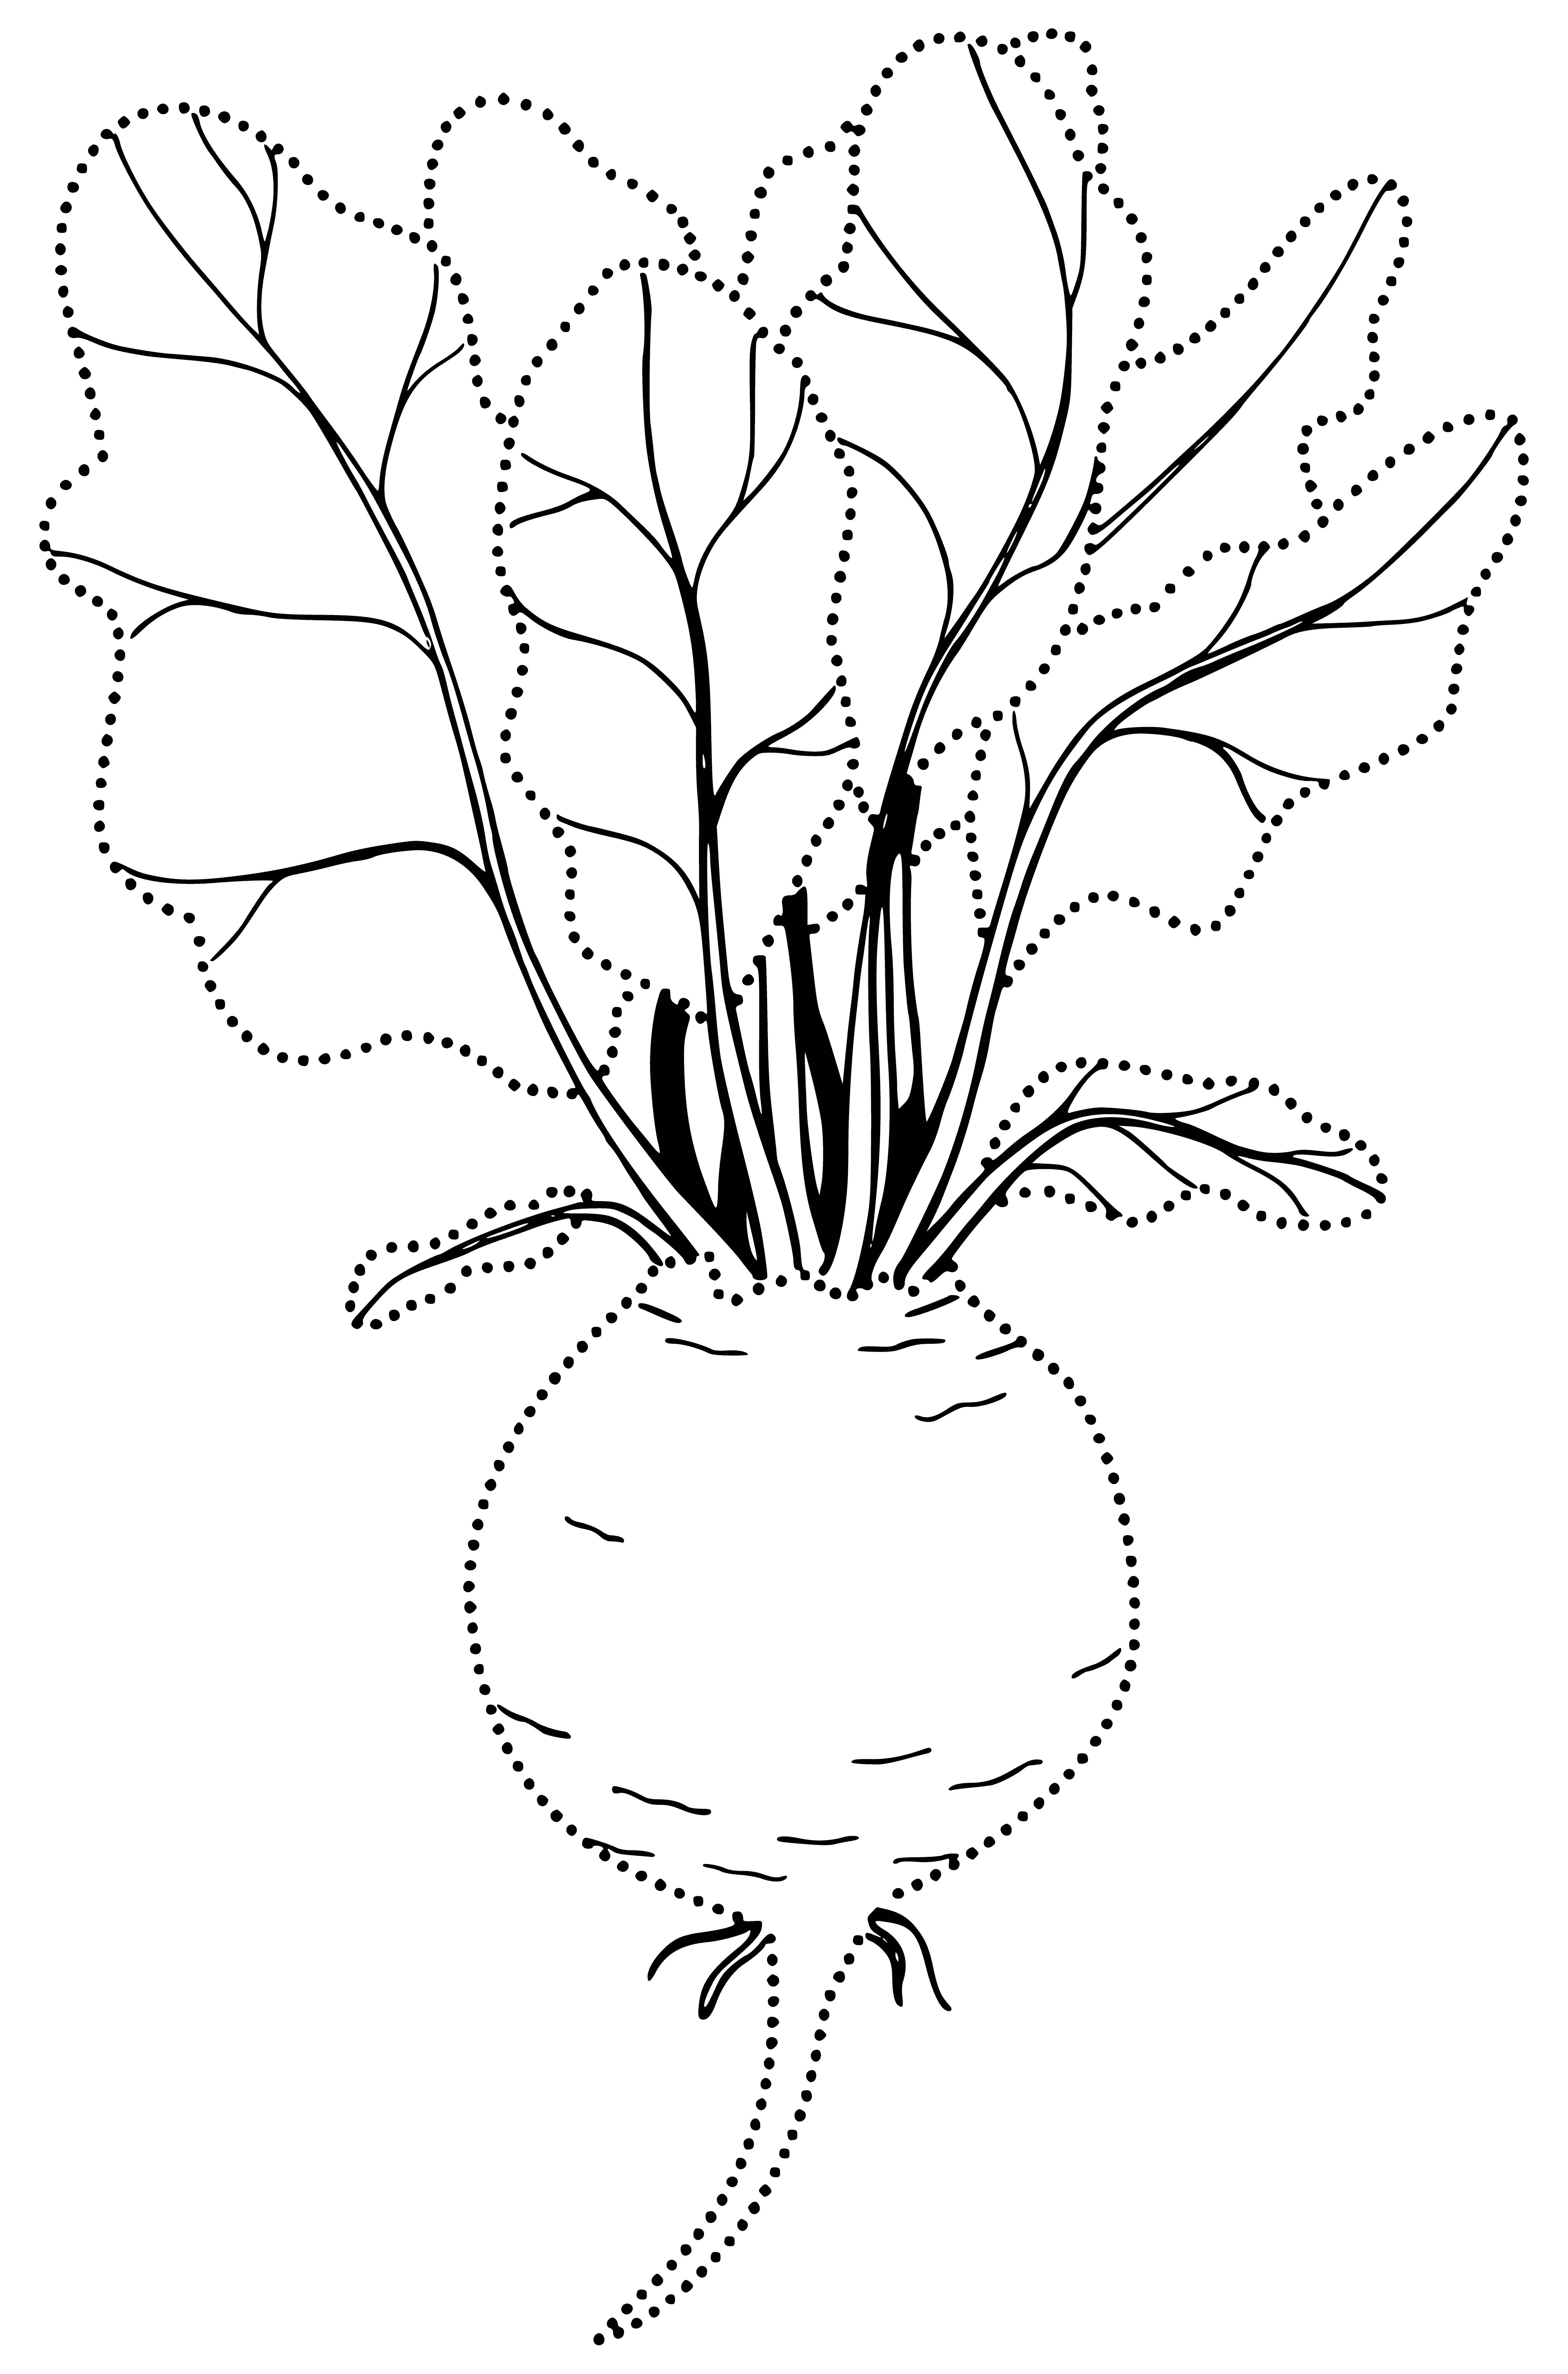 coloring page: There are three oblong, red/purple-skinned beetroots to color in, providing vitamins & minerals!